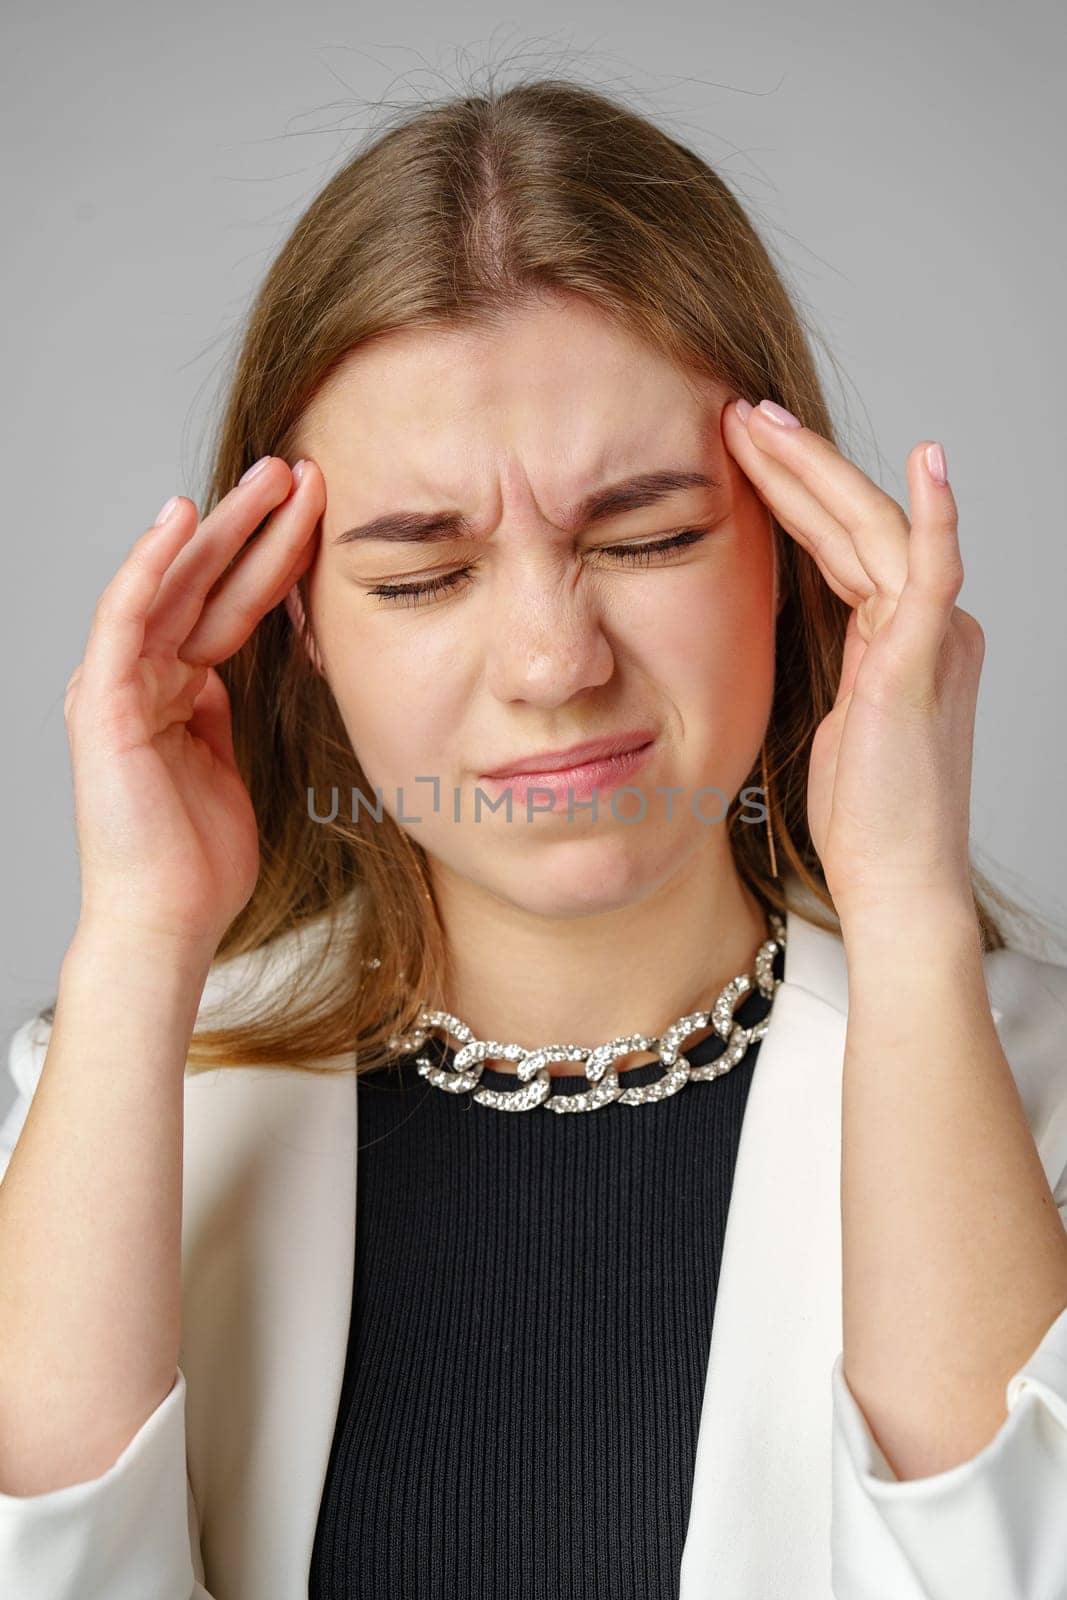 Woman Holding Her Head in Hands in Studio close up